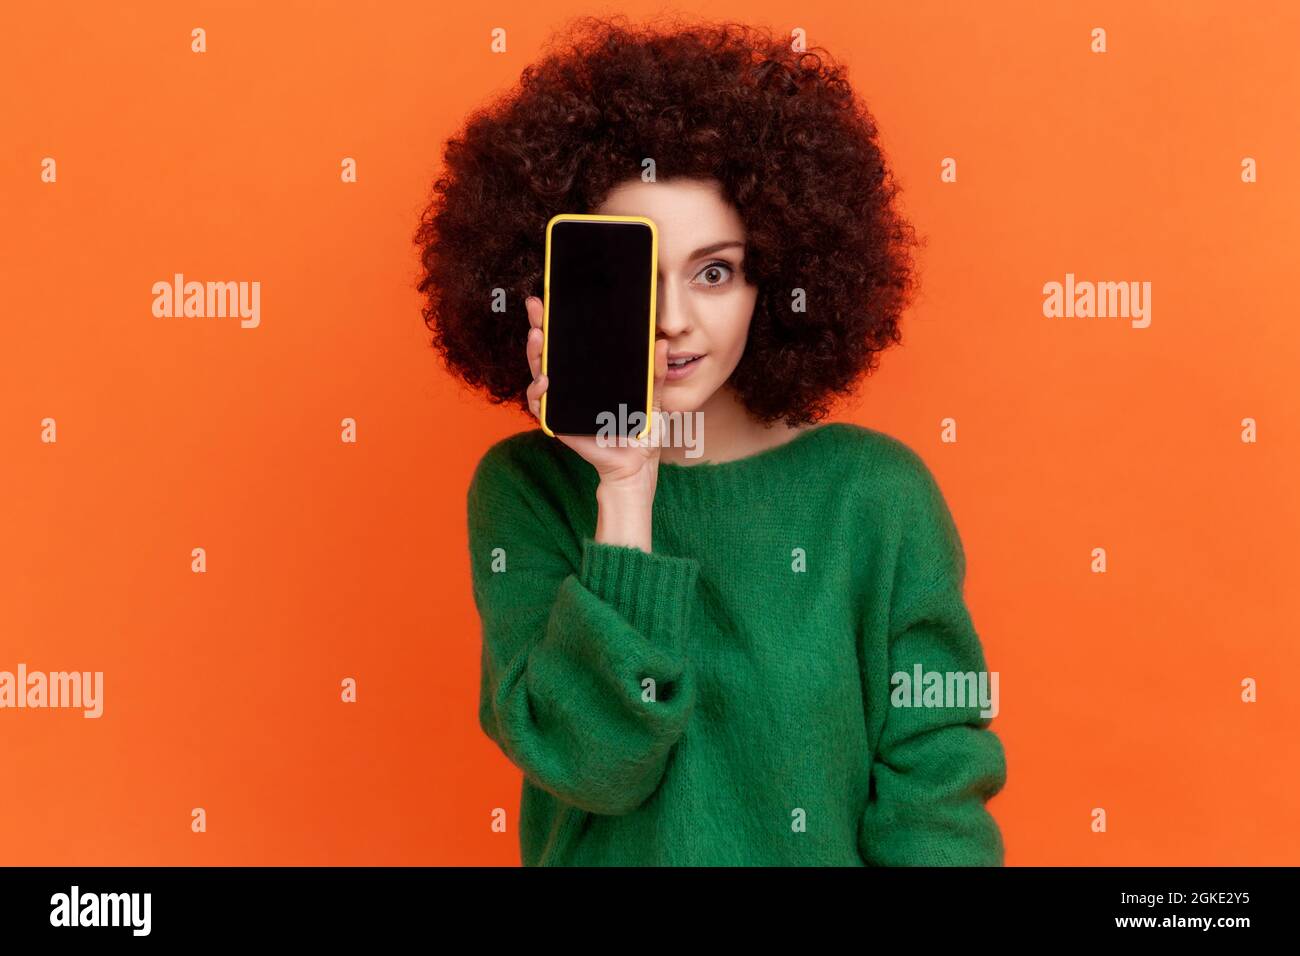 Attractive young adult woman with Afro hairstyle wearing green casual style sweater covering eye with cell phone with empty display. Indoor studio sho Stock Photo